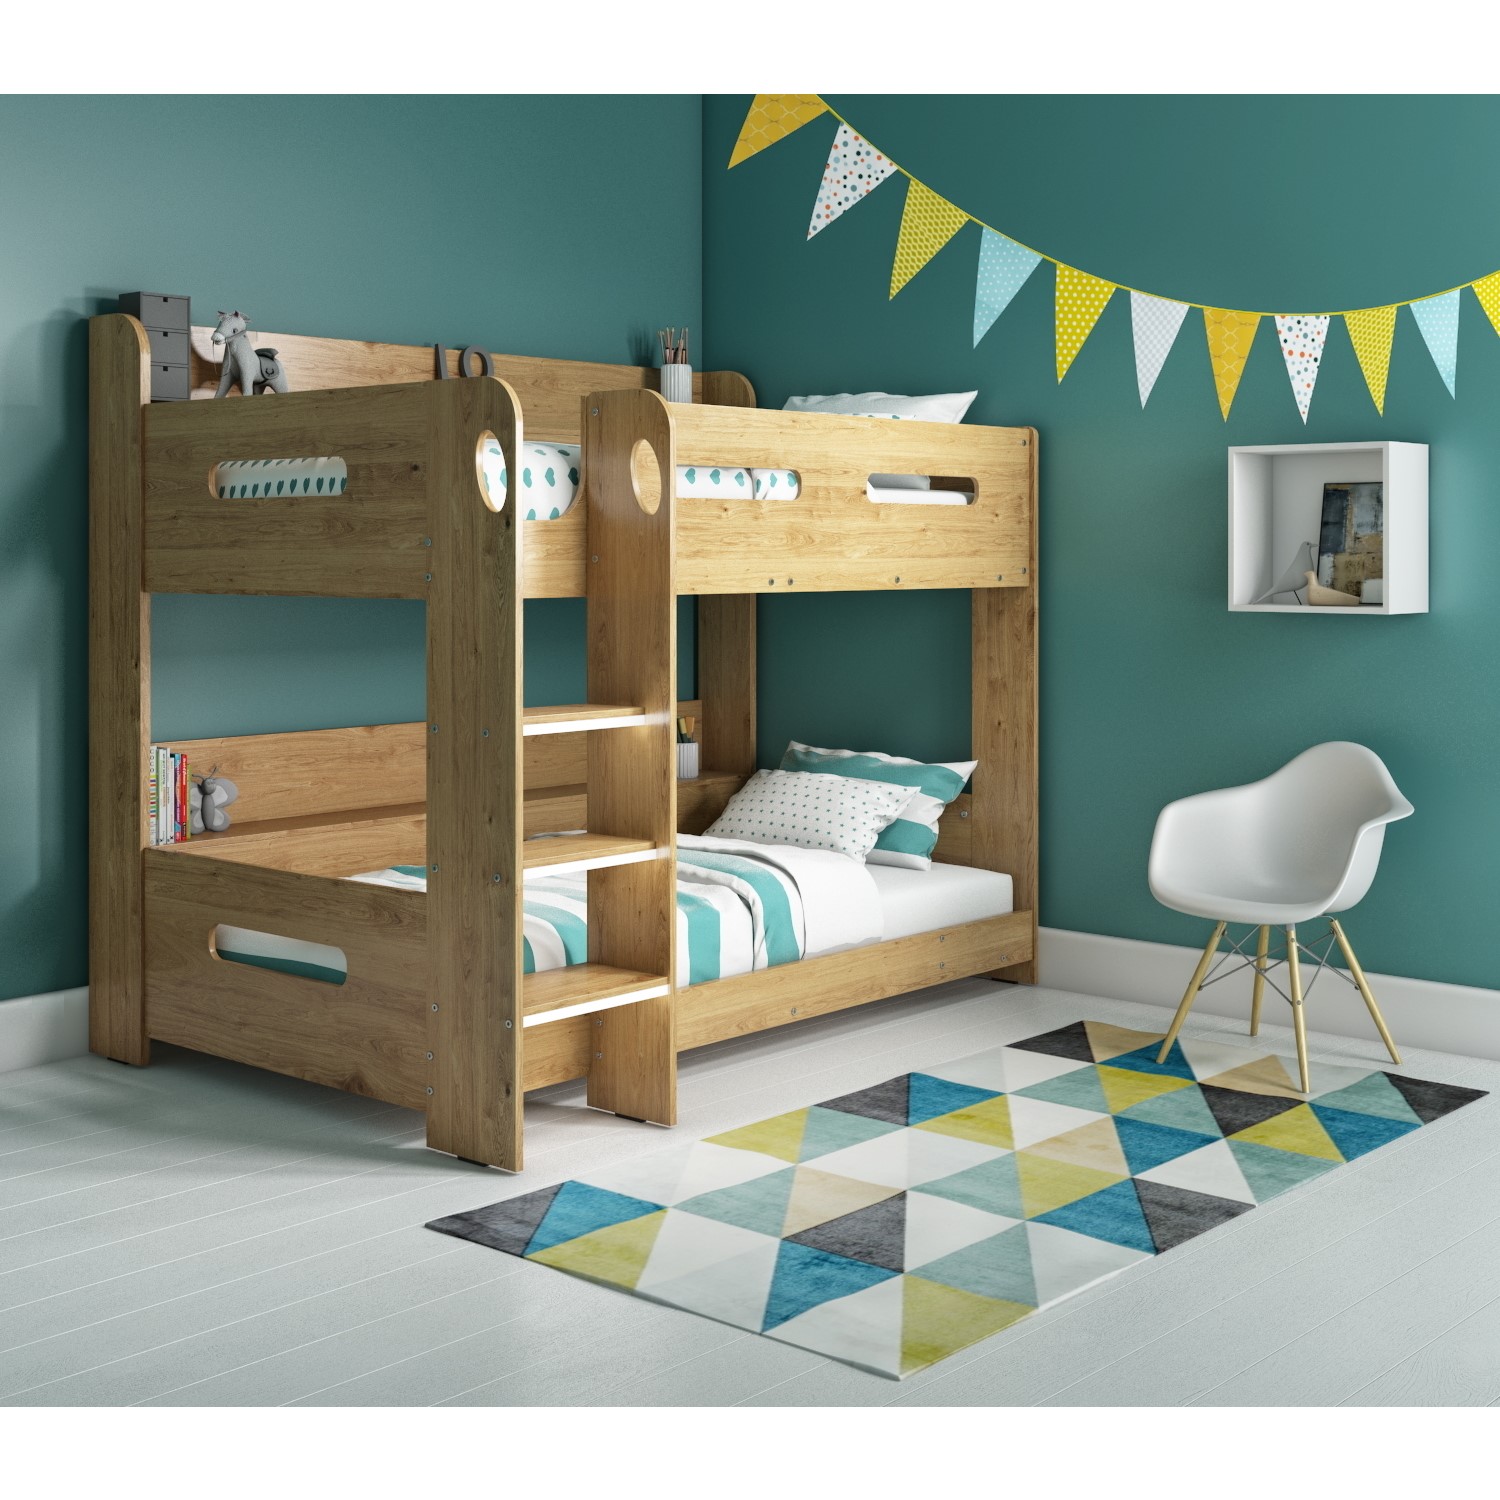 Sky Bunk Bed In Oak Ladder Can Be, Oak Bunk Beds With Storage